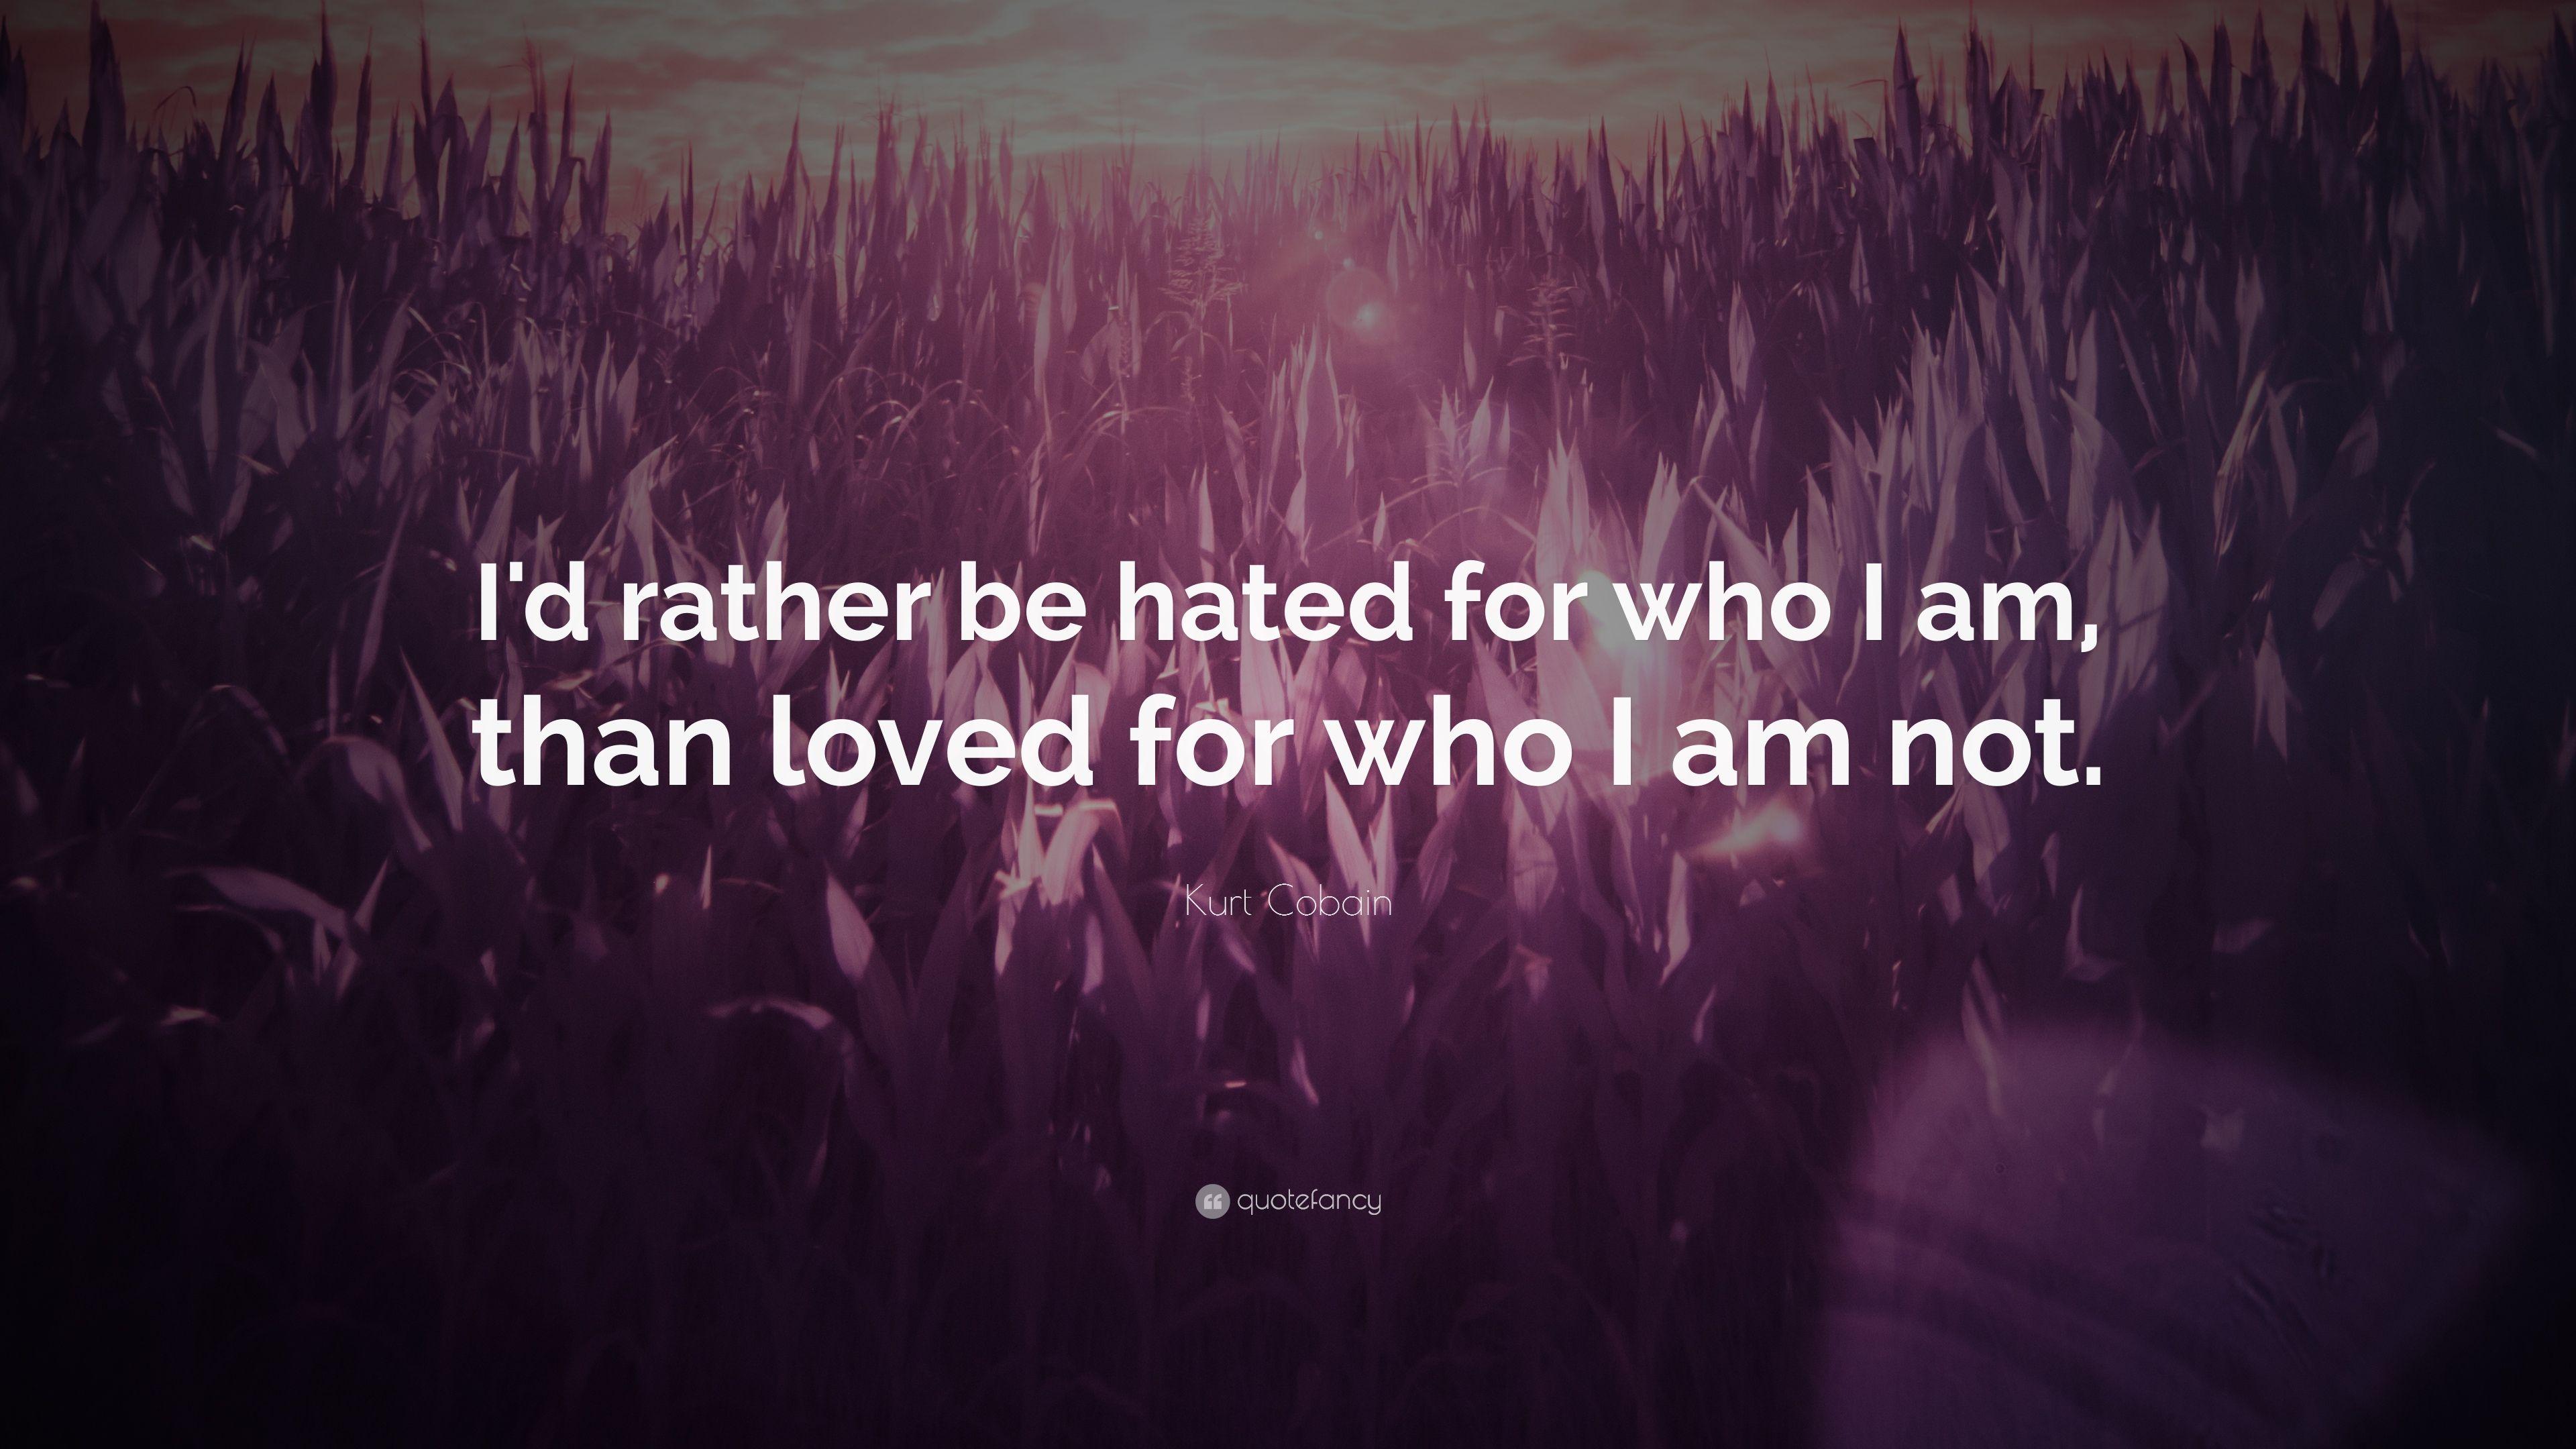 Kurt Cobain Quote: “I'd rather be hated for who I am, than loved